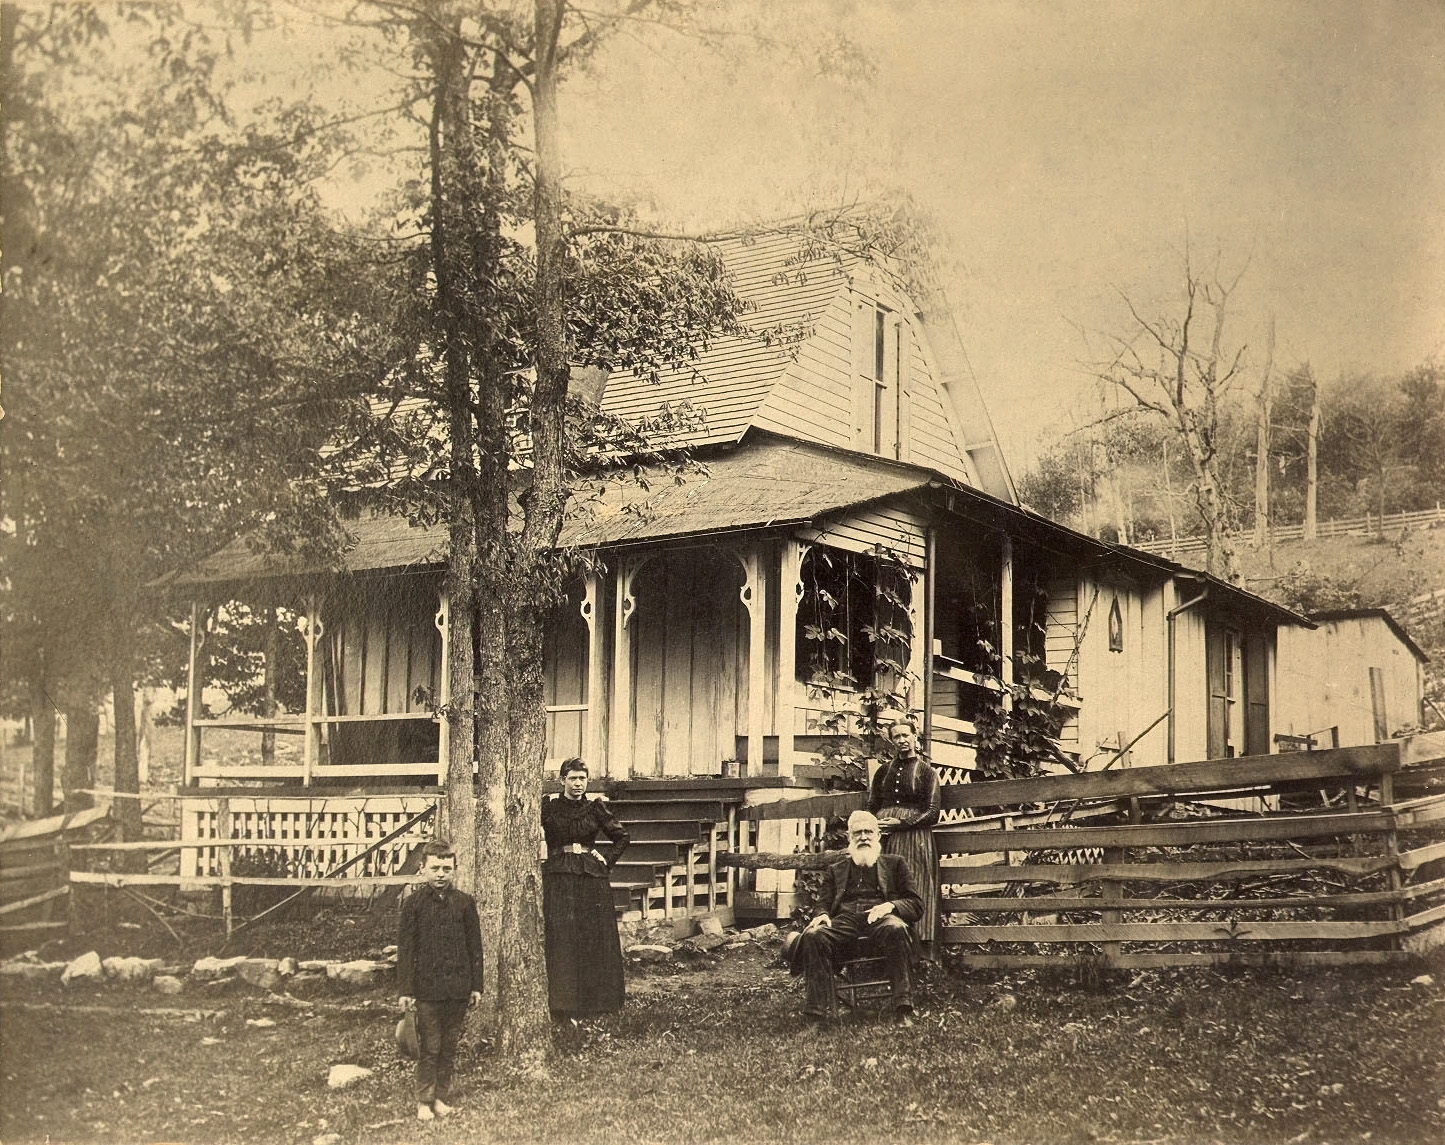 Photo taken circa 1895 in Terra Alta, West Virginia. At right are my great-grandfather and great-grandmother, John and Catherine Hewitt, with their daughter Eudora Hewitt and a grandson standing at left. The house is very unusual as the top or upper half looks as though it was an add-on. View full size.